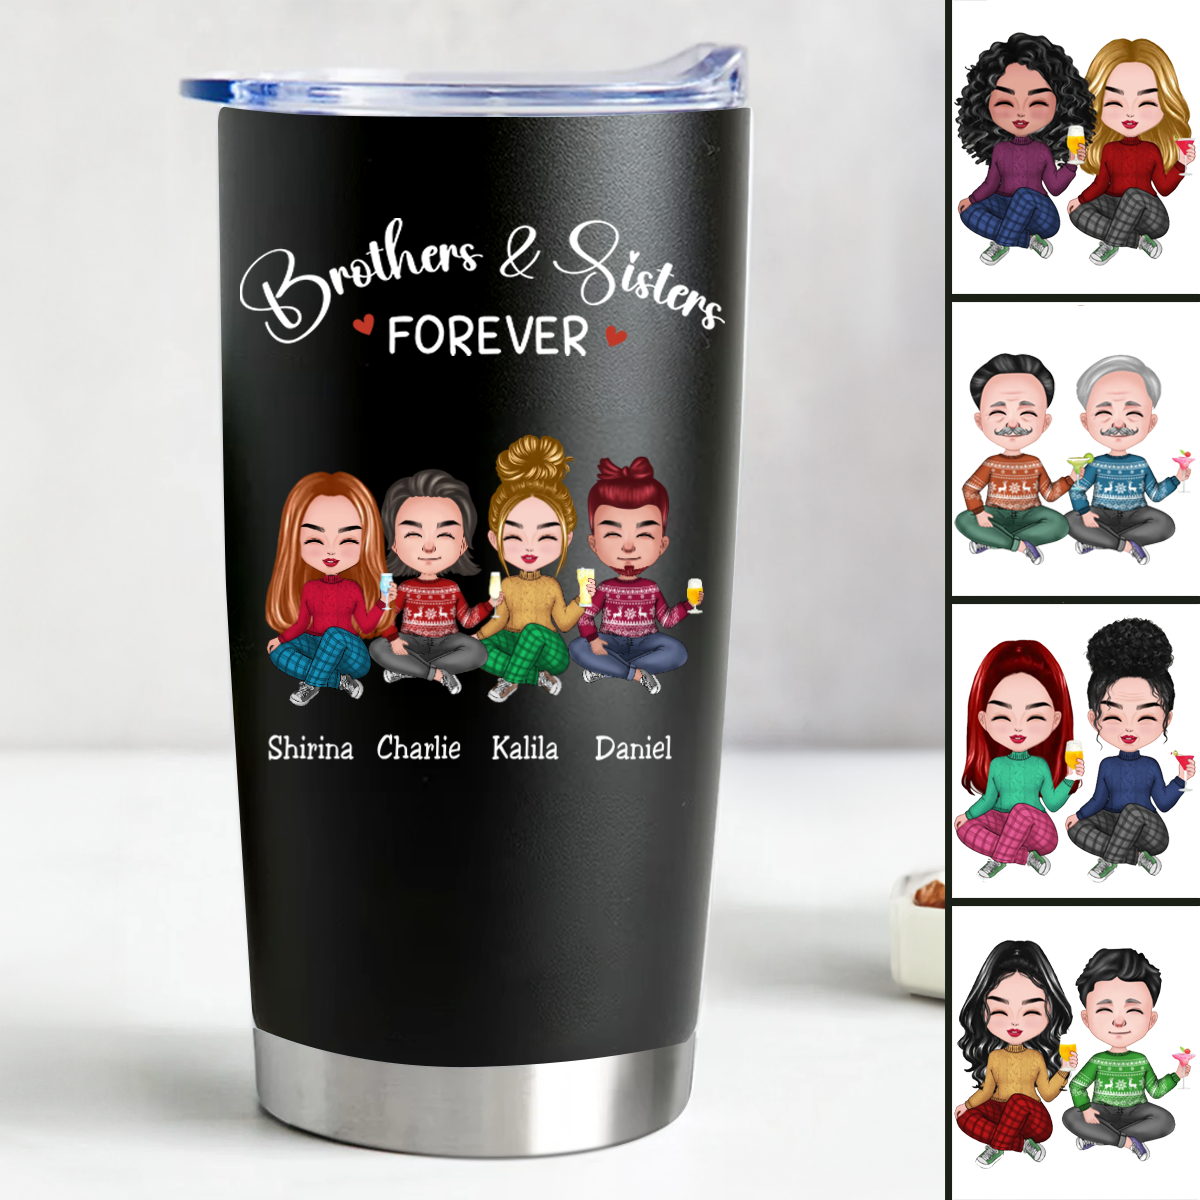 Discover                  20oz Brothers & Sisters Forever - Personalized Tumbler (BL)                                                                                Popular now                                                                        